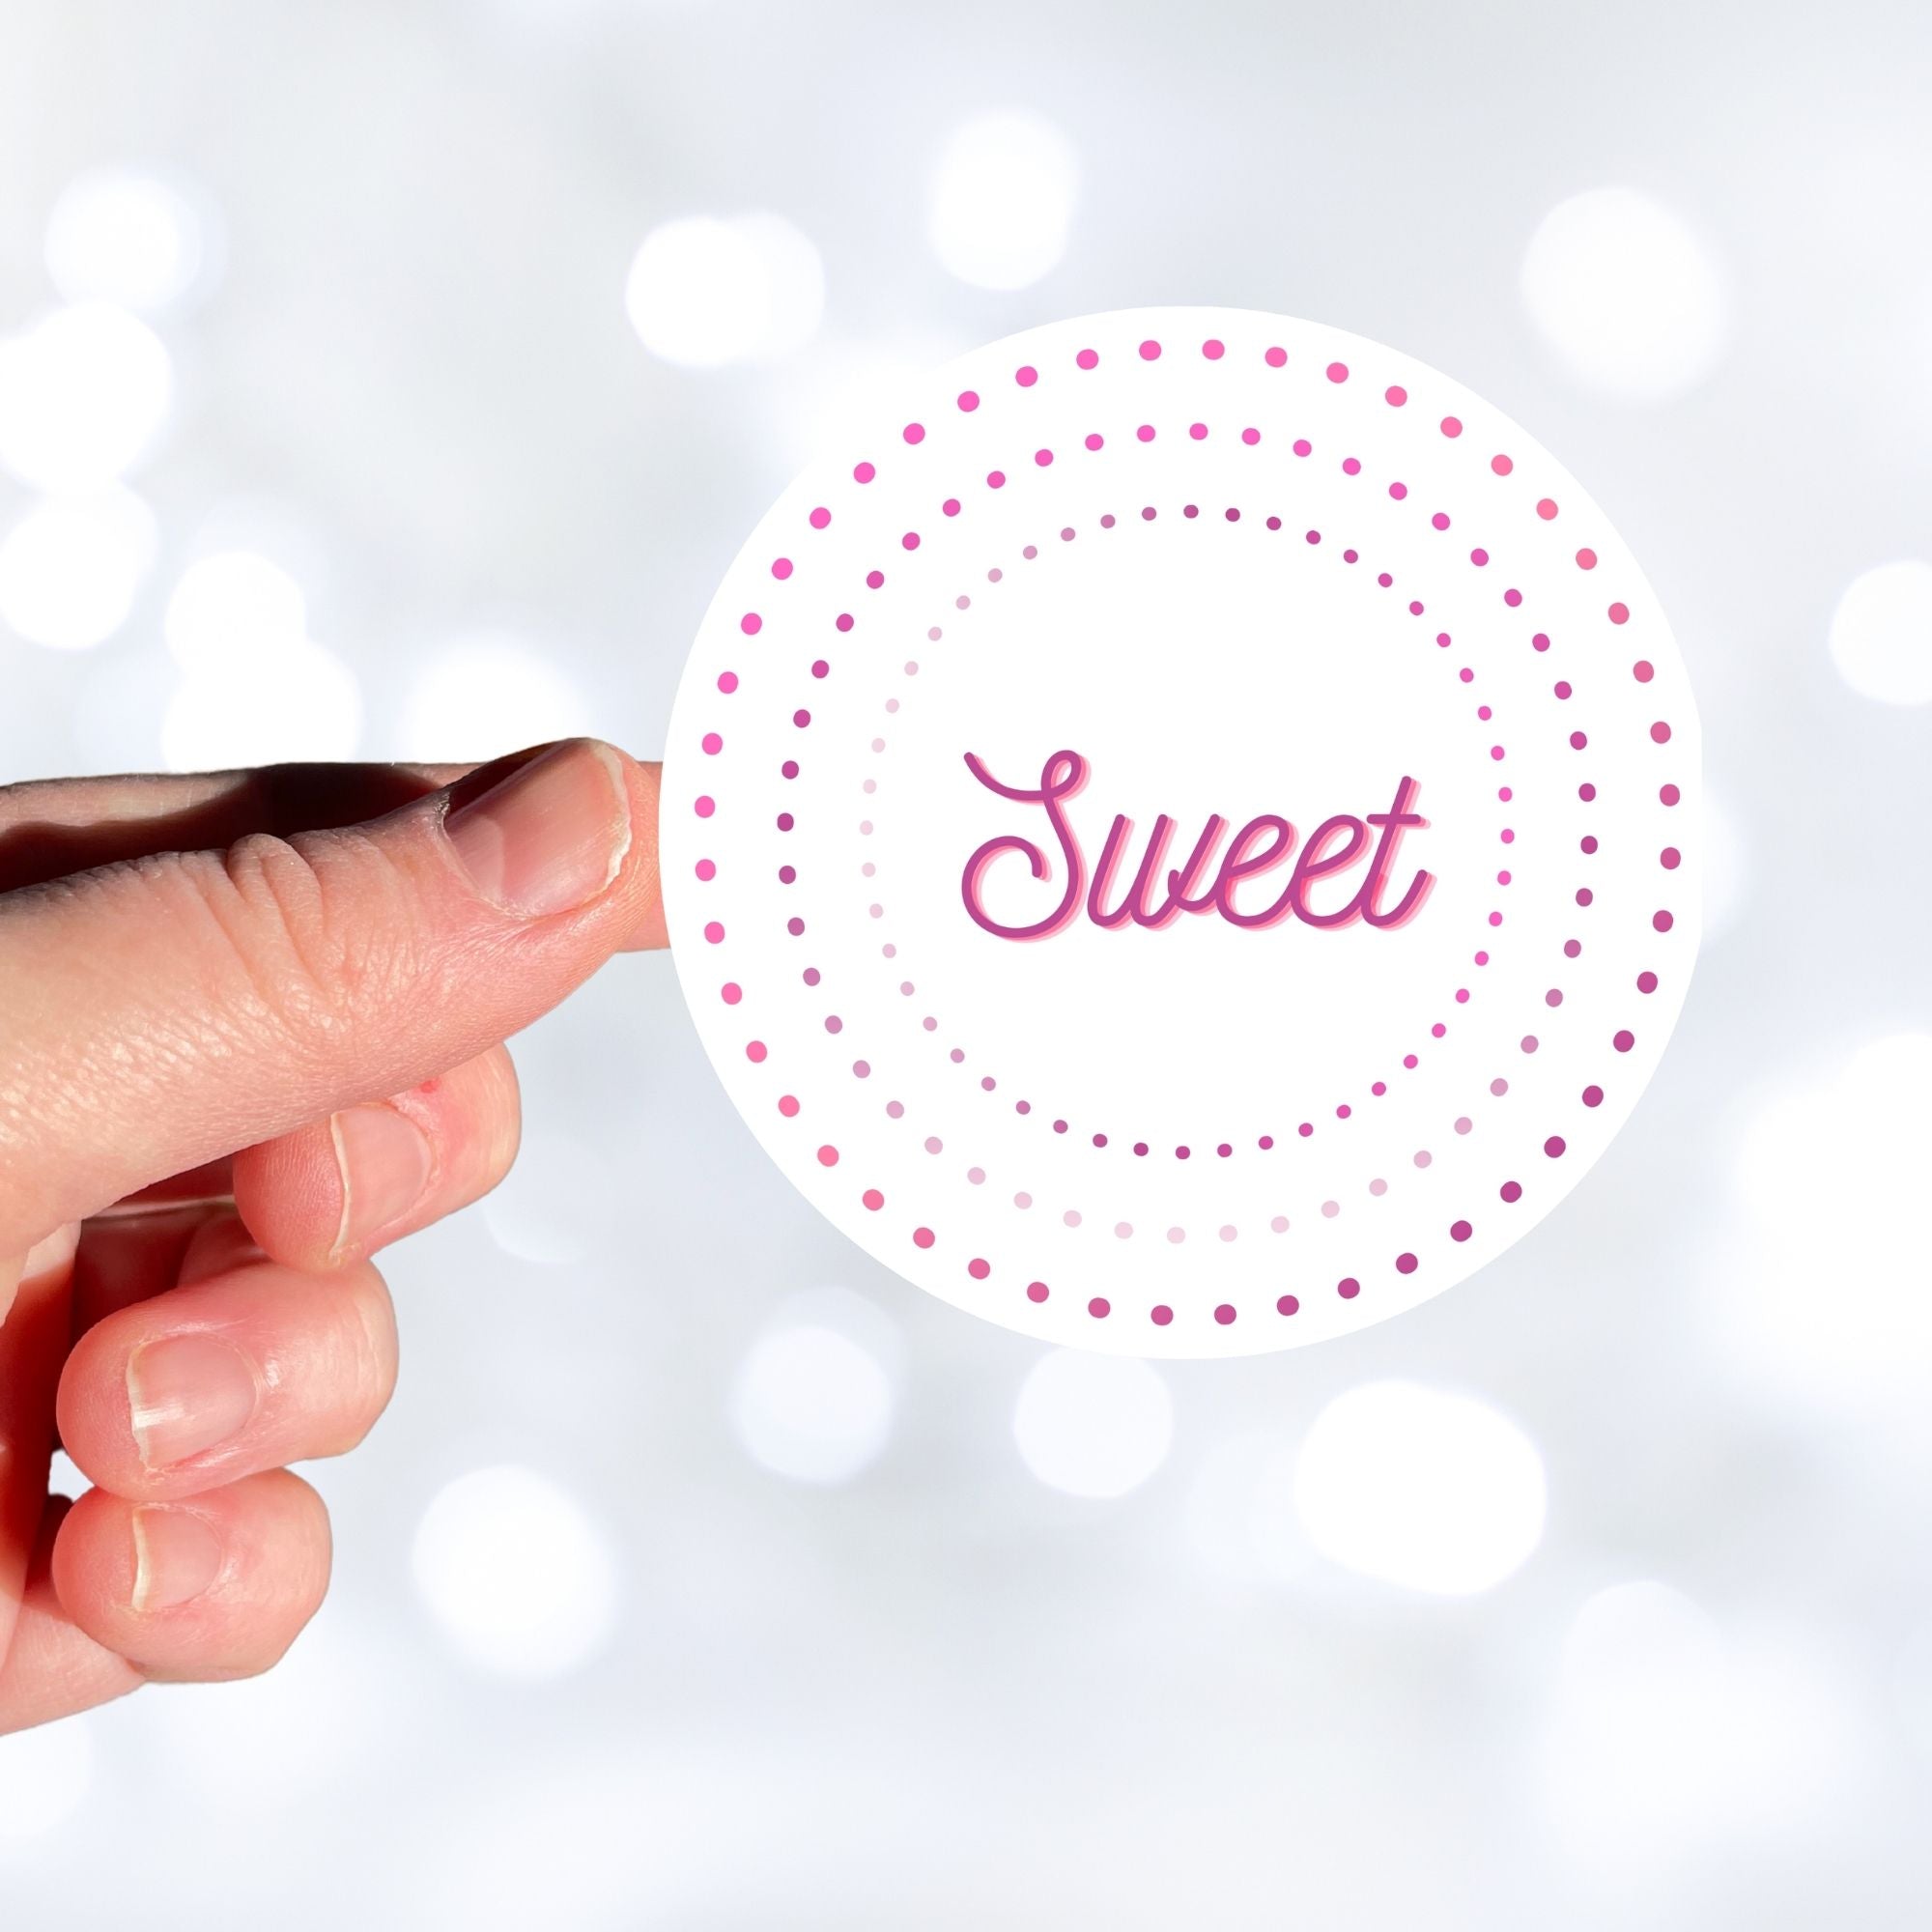 This round individual die-cut sticker is Sweet! It features the word Sweet in the center surrounded by pink and purple circular dots. This makes a great gift for anyone you're sweet on! This image shows a hand holding the Sweet sticker.